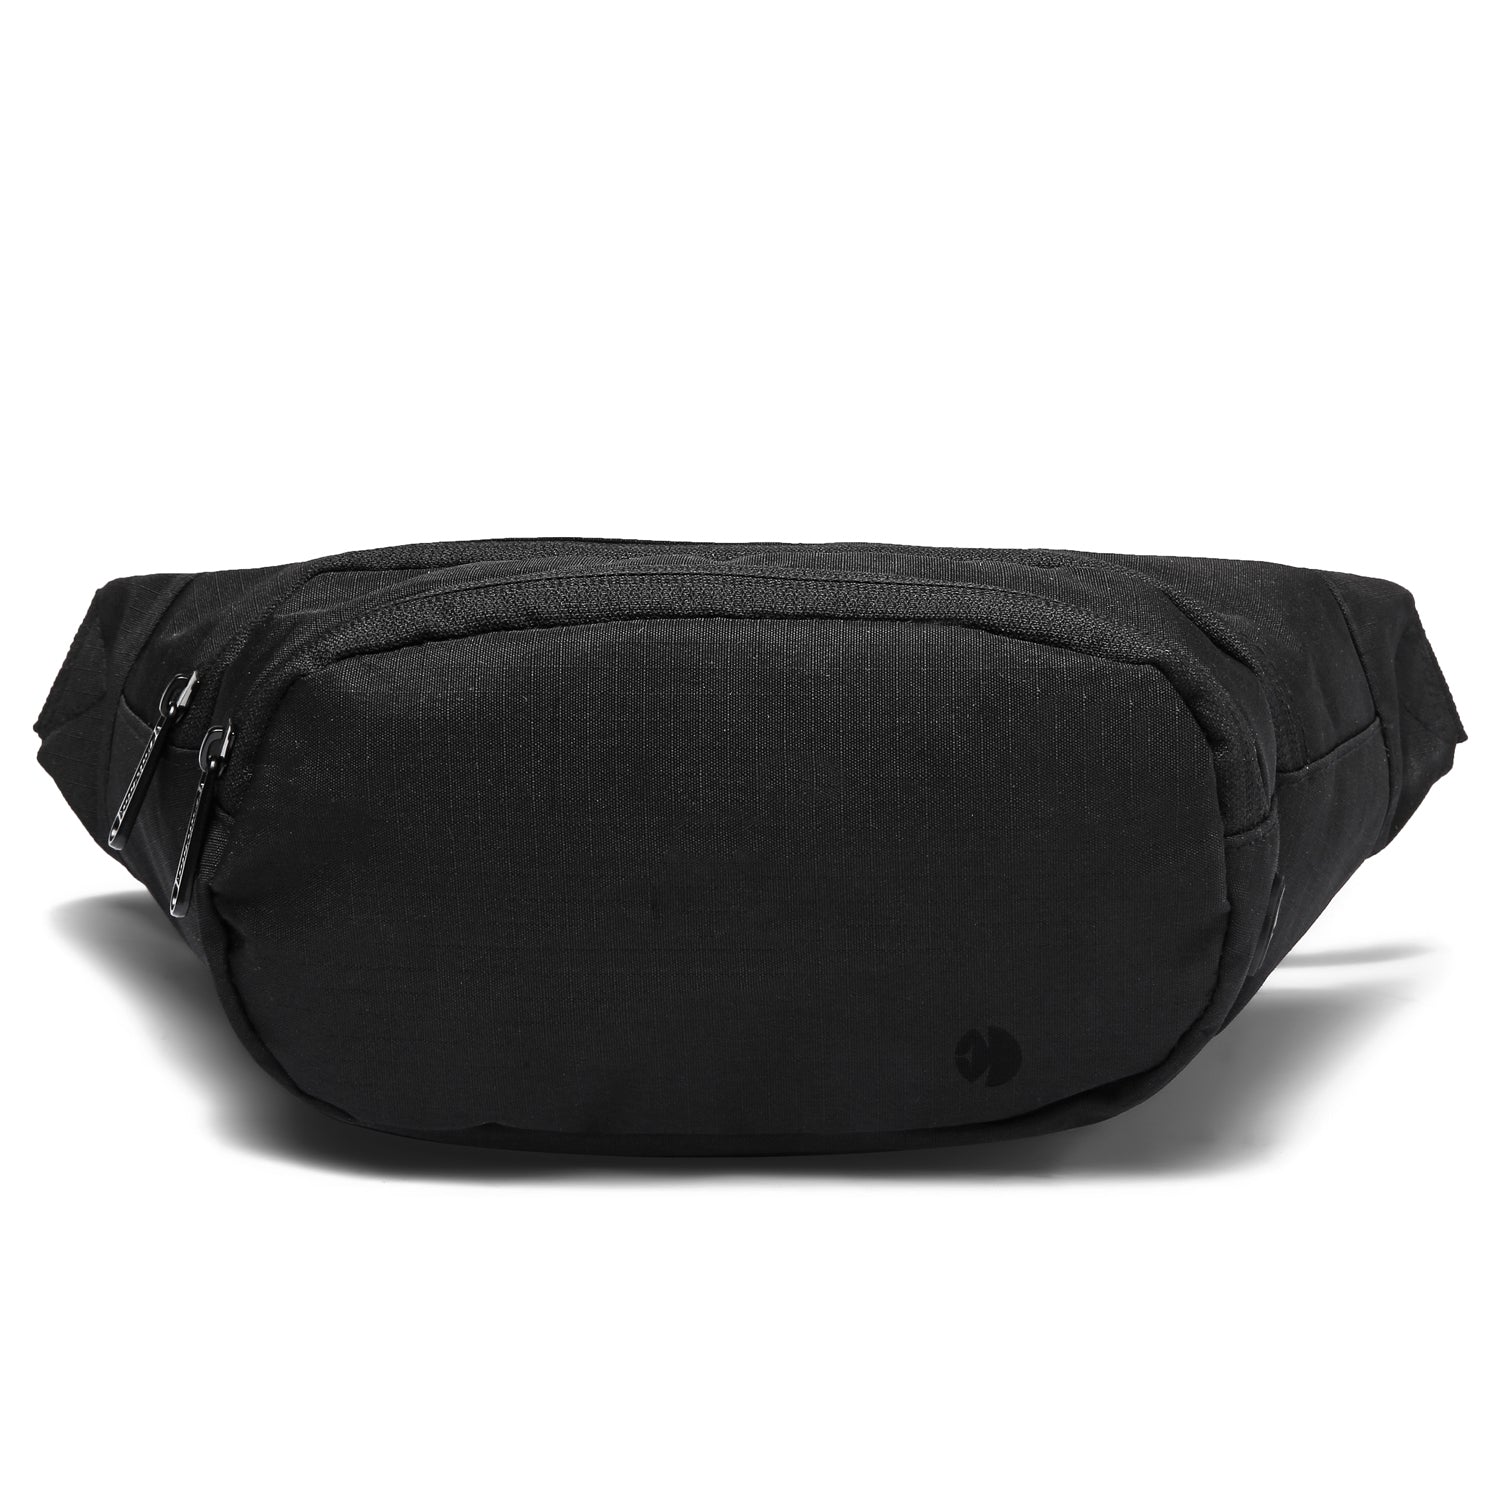 Entchin Fanny Pack for Women Men Hip Pack with Headphone Jack